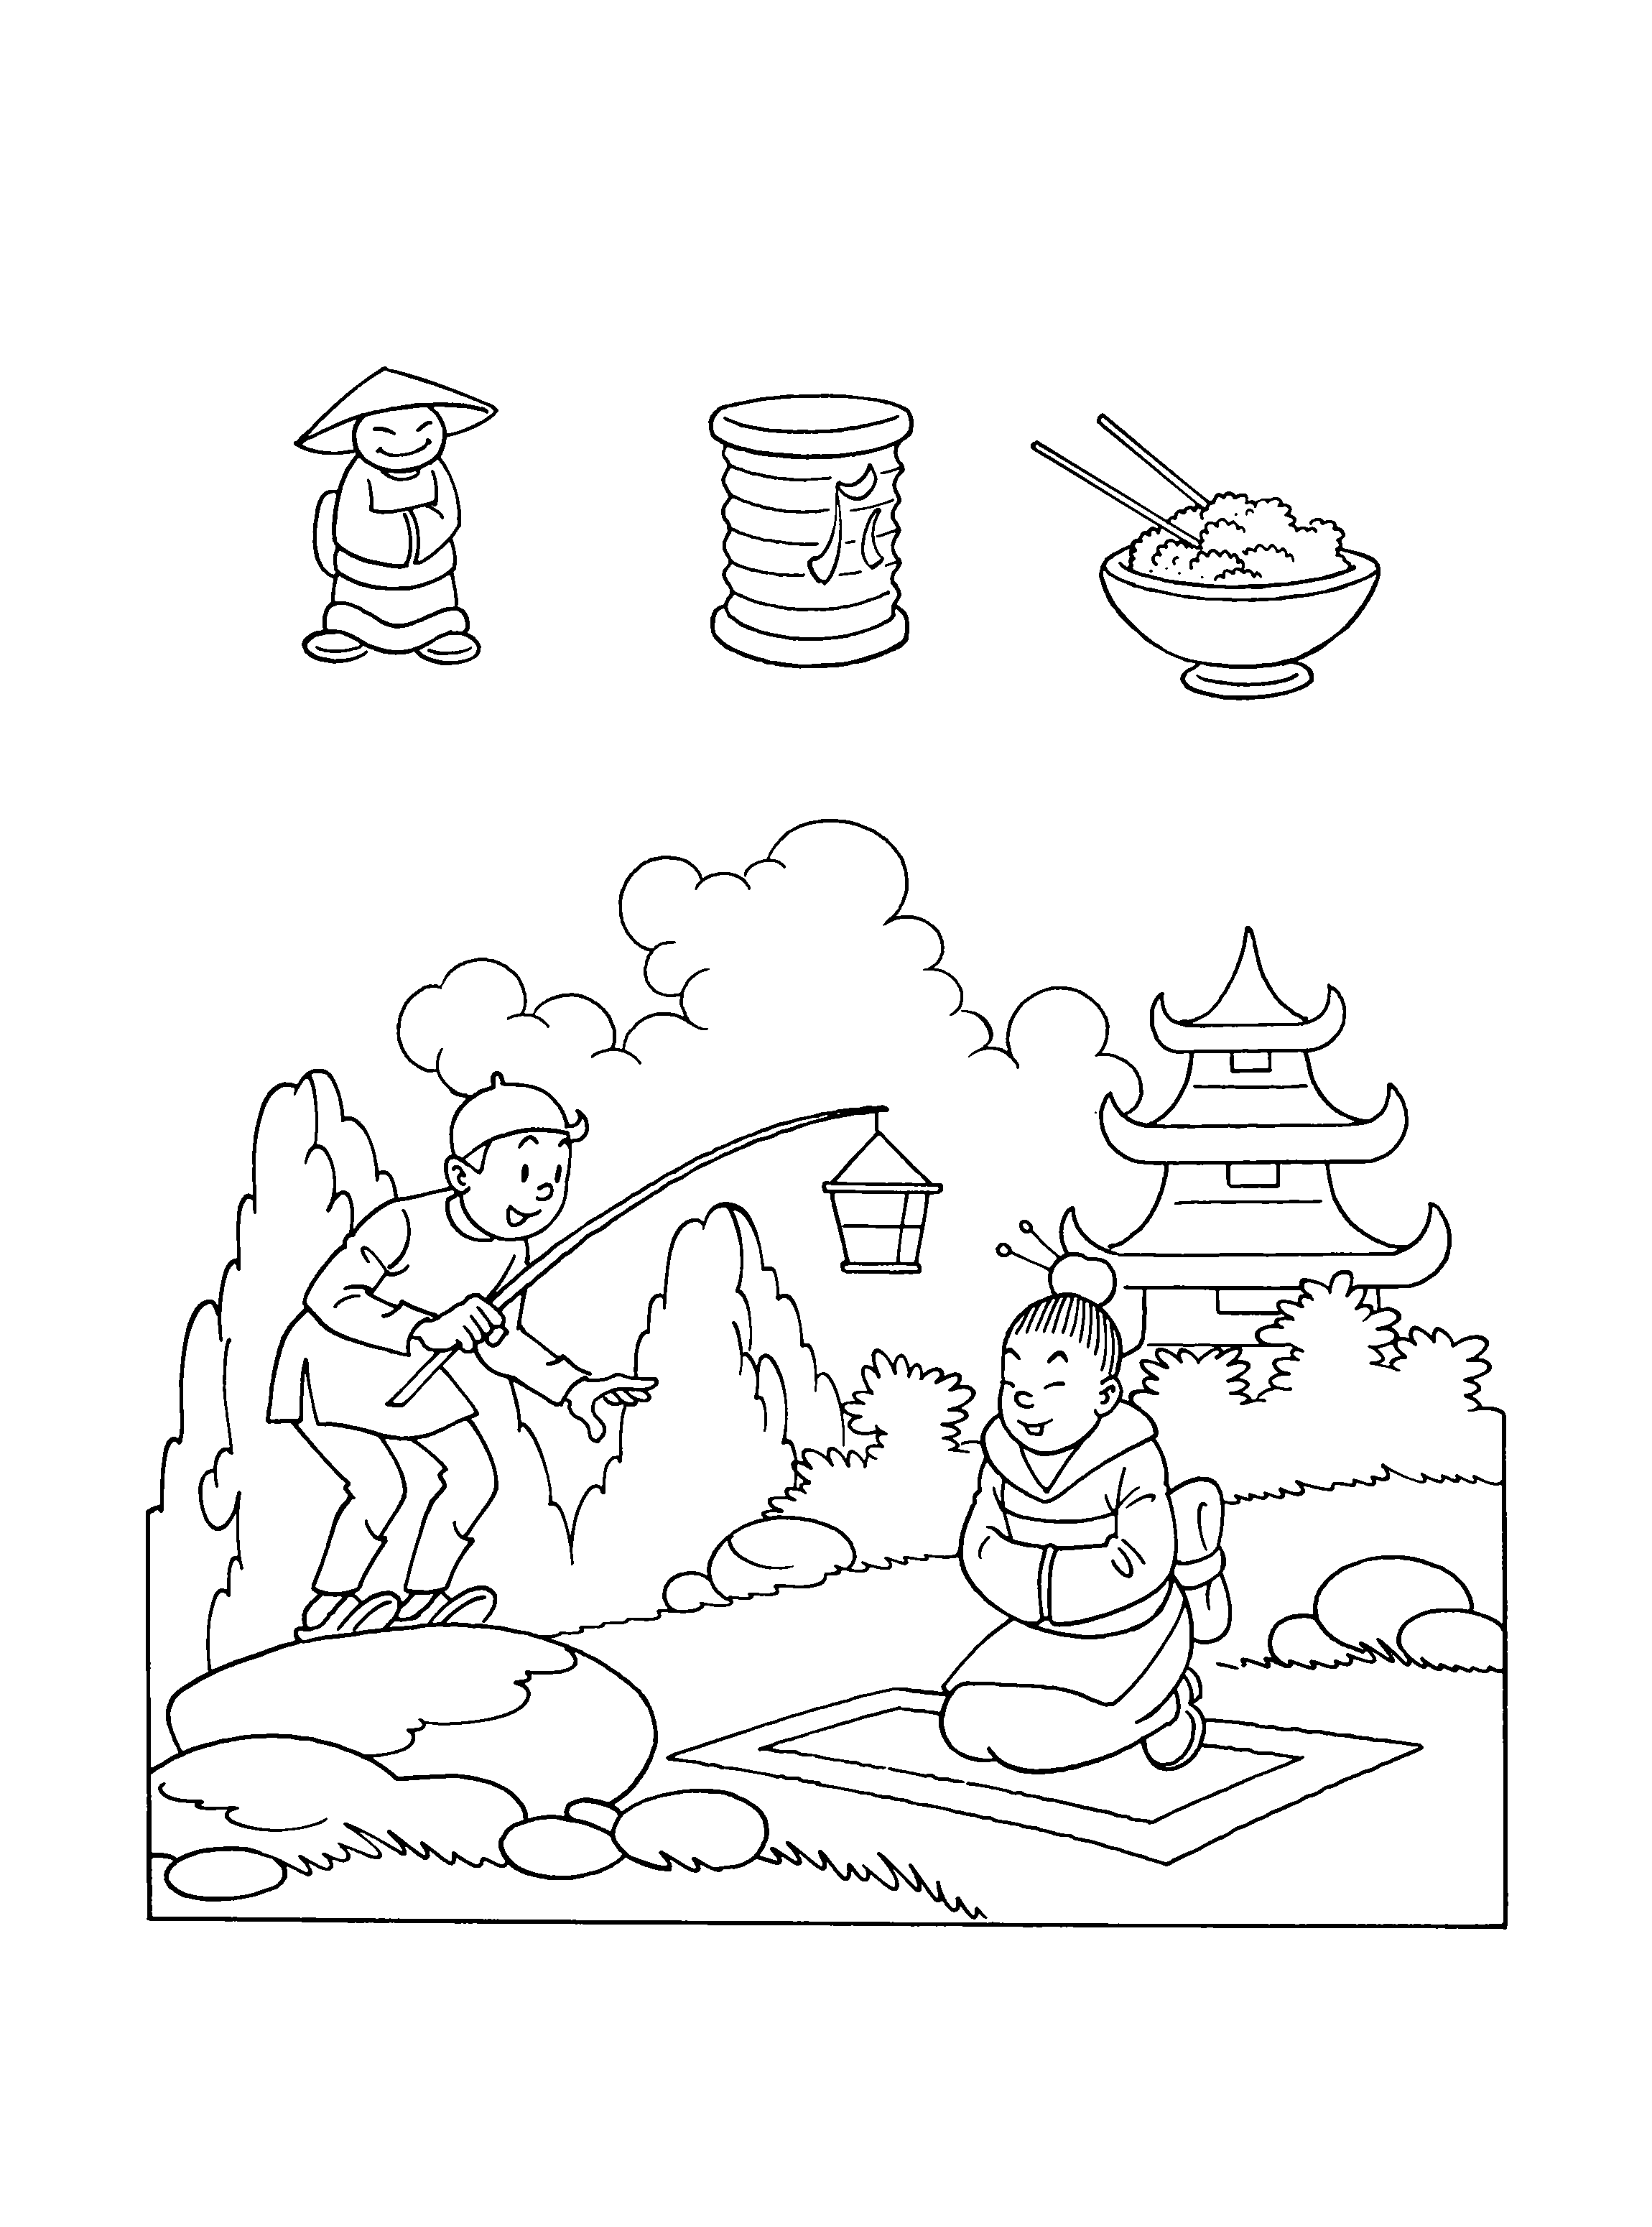 Coloring Page - Spike and suzy coloring pages 23